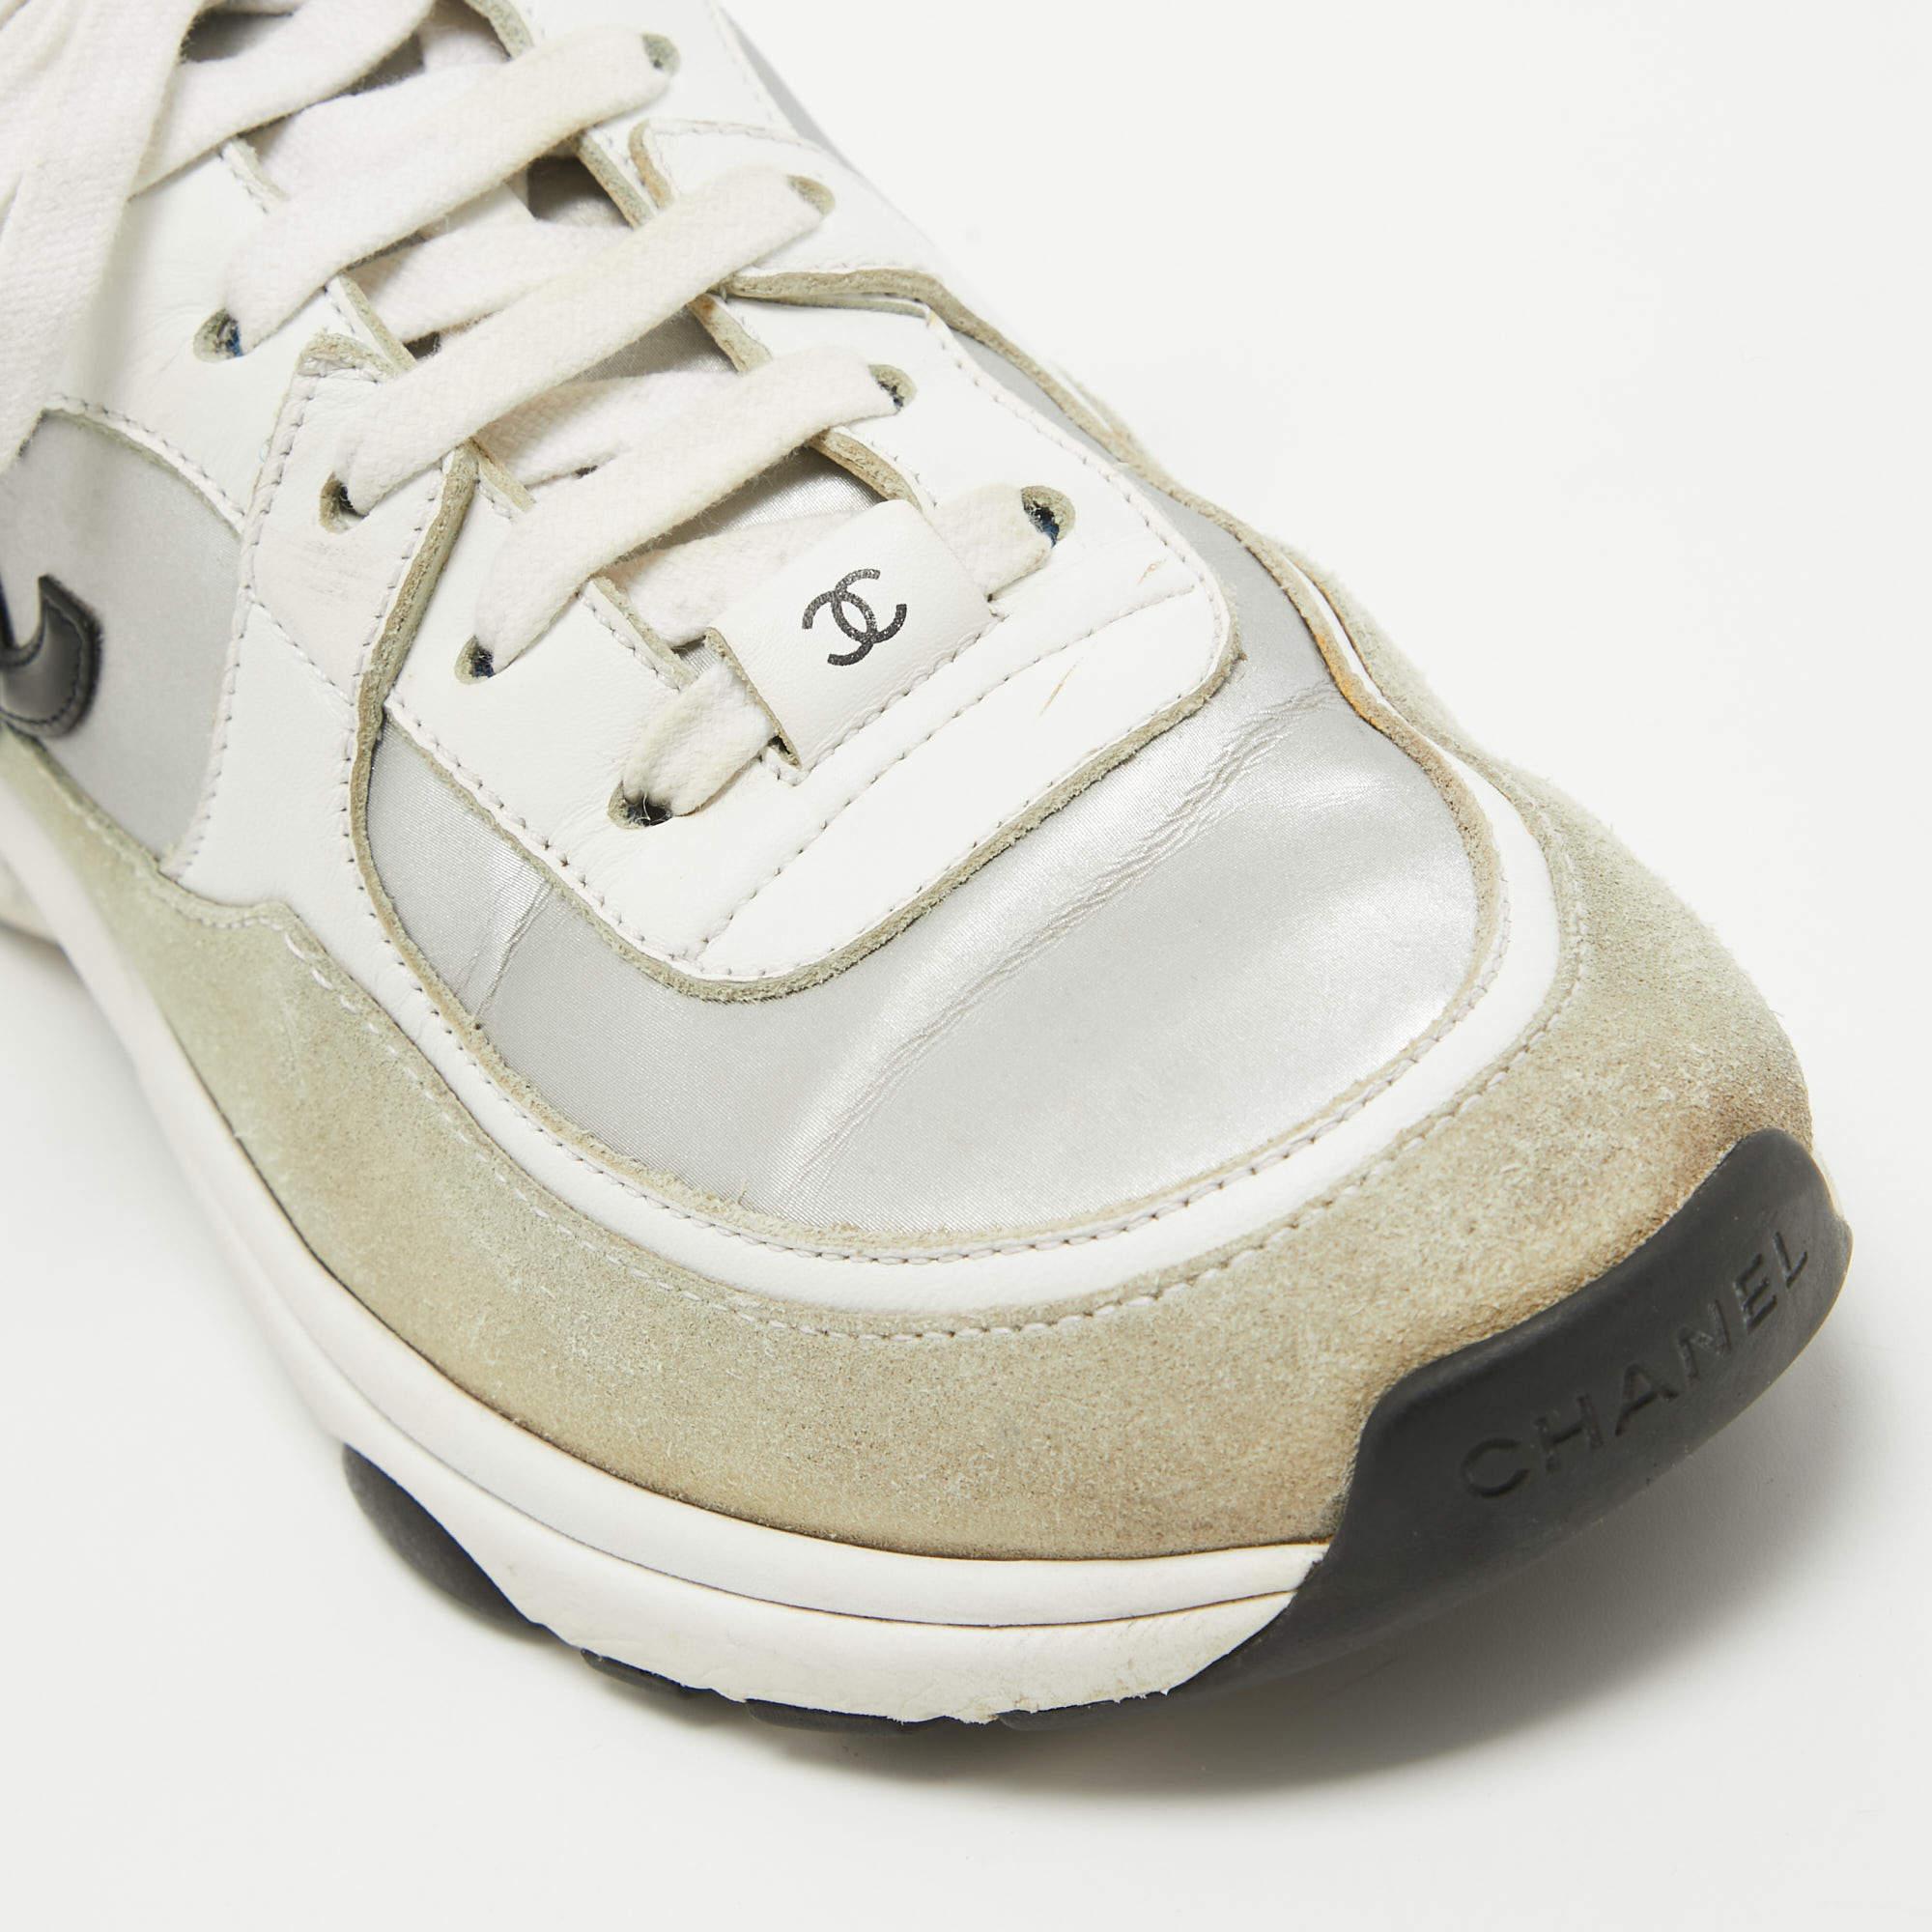 Coming in a classic silhouette, these Chanel women's sneakers are a seamless combination of luxury, comfort, and style. These sneakers are designed with signature details and comfortable insoles.

